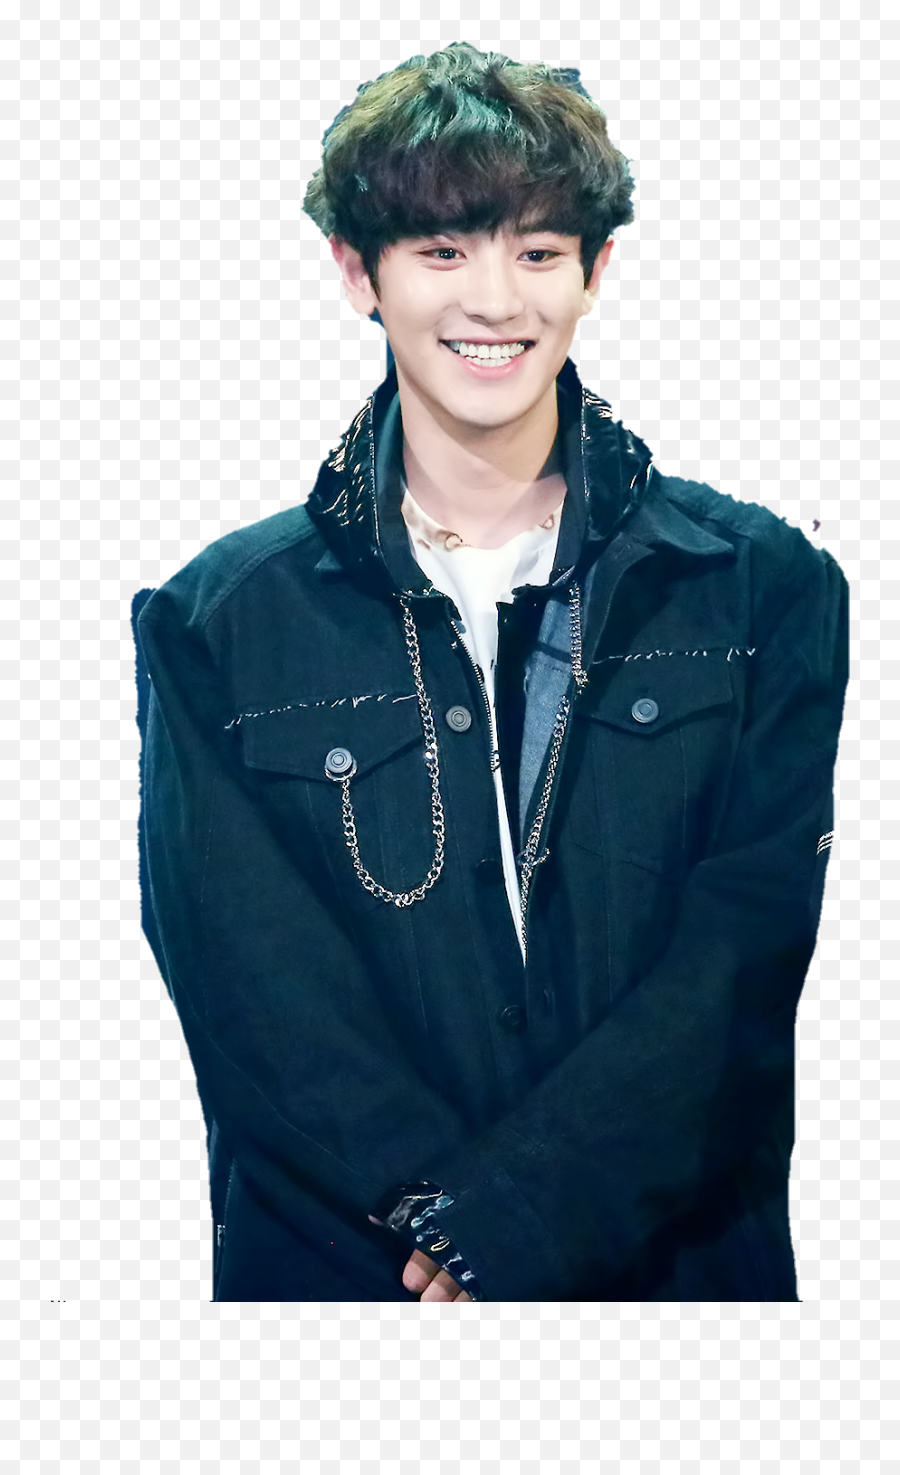 Download Free Png Chanyeol Exo - Exo Chanyeol Png,Chanyeol Png